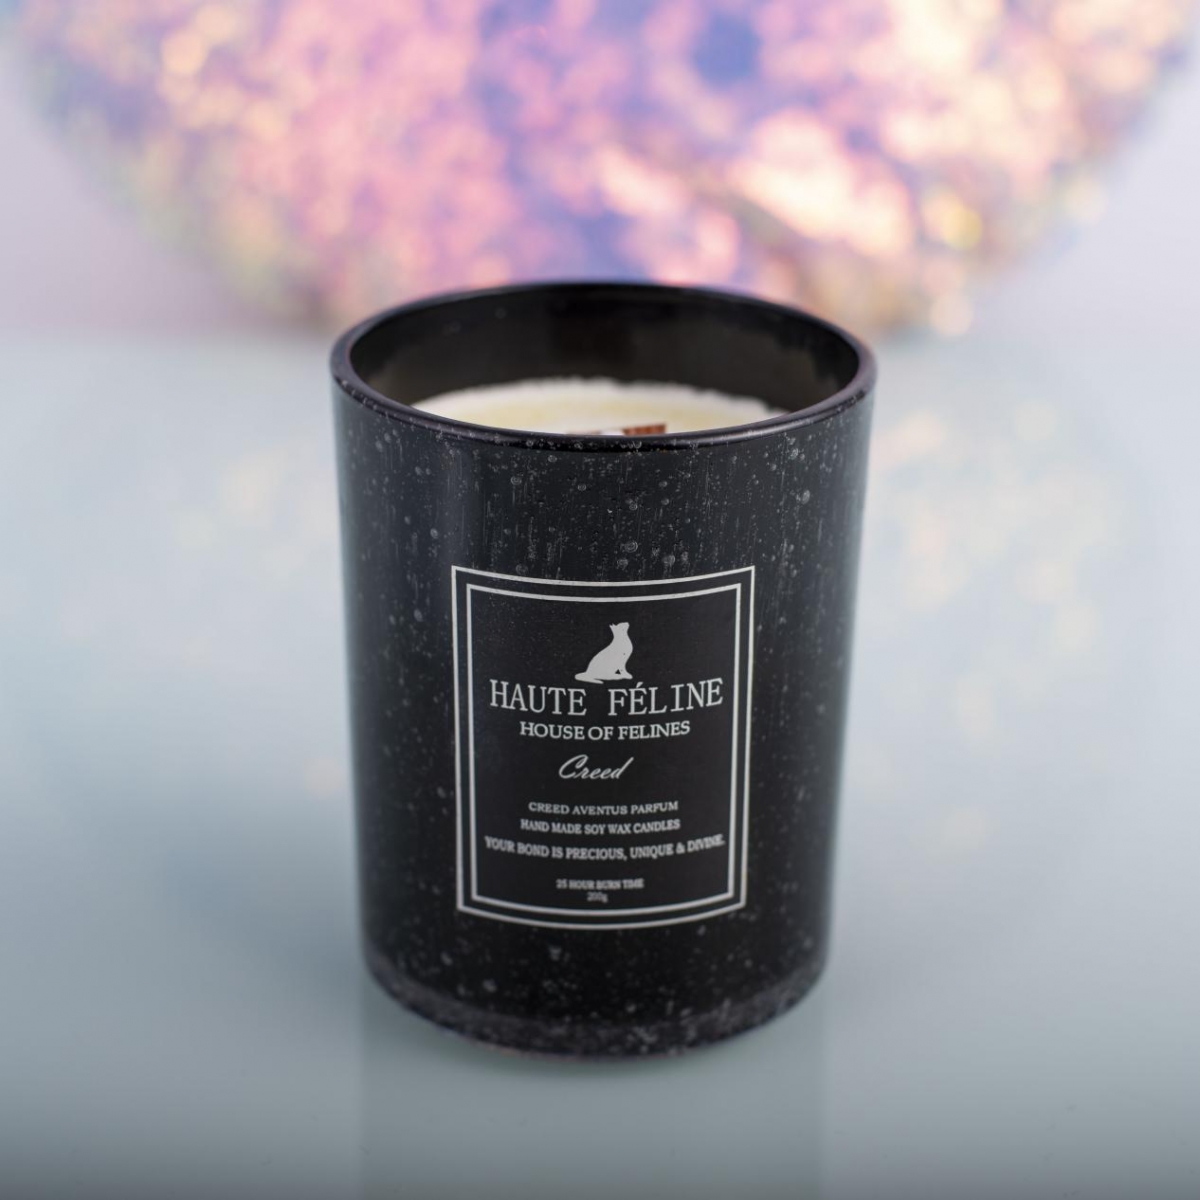 Soy Candles : Creed Aventus Candles , Black Candles ,Bubble Glass Jar, Perfume Candles ,China Factory , Wholesale Price-HOWCANDLE-Candles,Scented Candles,Aromatherapy Candles,Soy Candles,Vegan Candles,Jar Candles,Pillar Candles,Candle Gift Sets,Essential Oils,Reed Diffuser,Candle Holder,